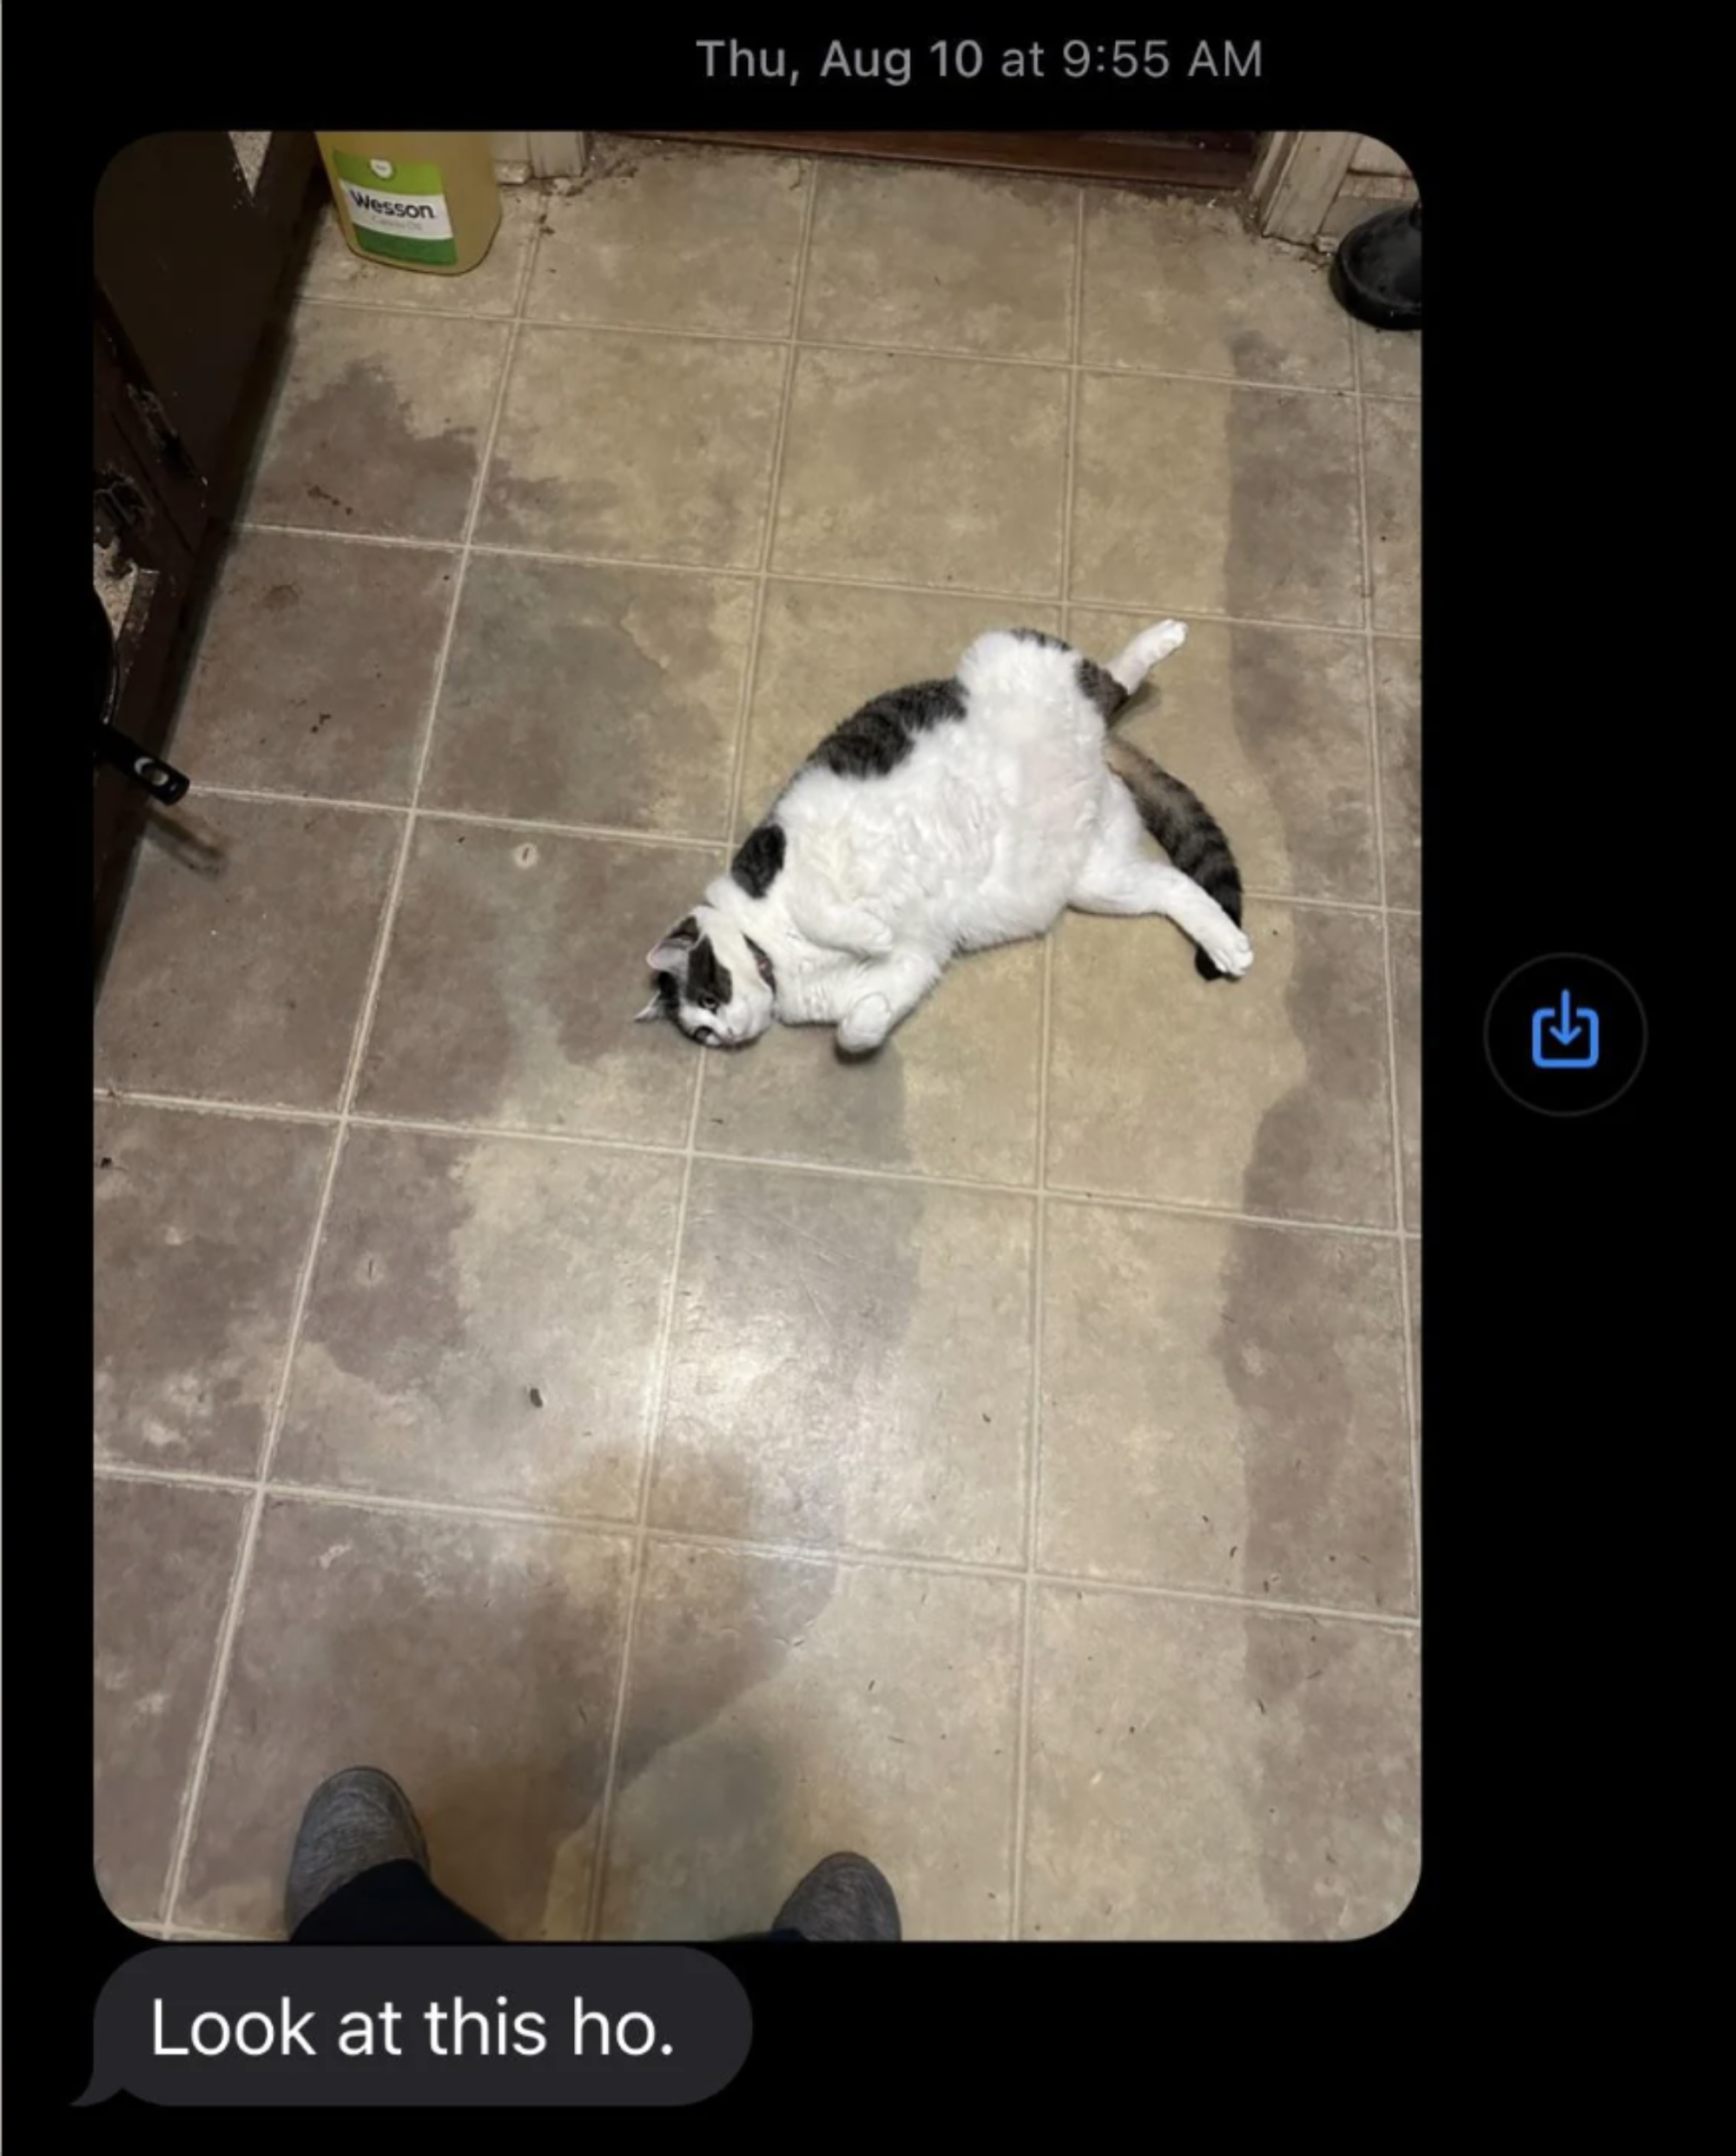 Fat white and black cat lying on floor, timestamped Thu, Aug 10 at 9:55 AM. Text reads, &quot;Look at this ho.&quot;